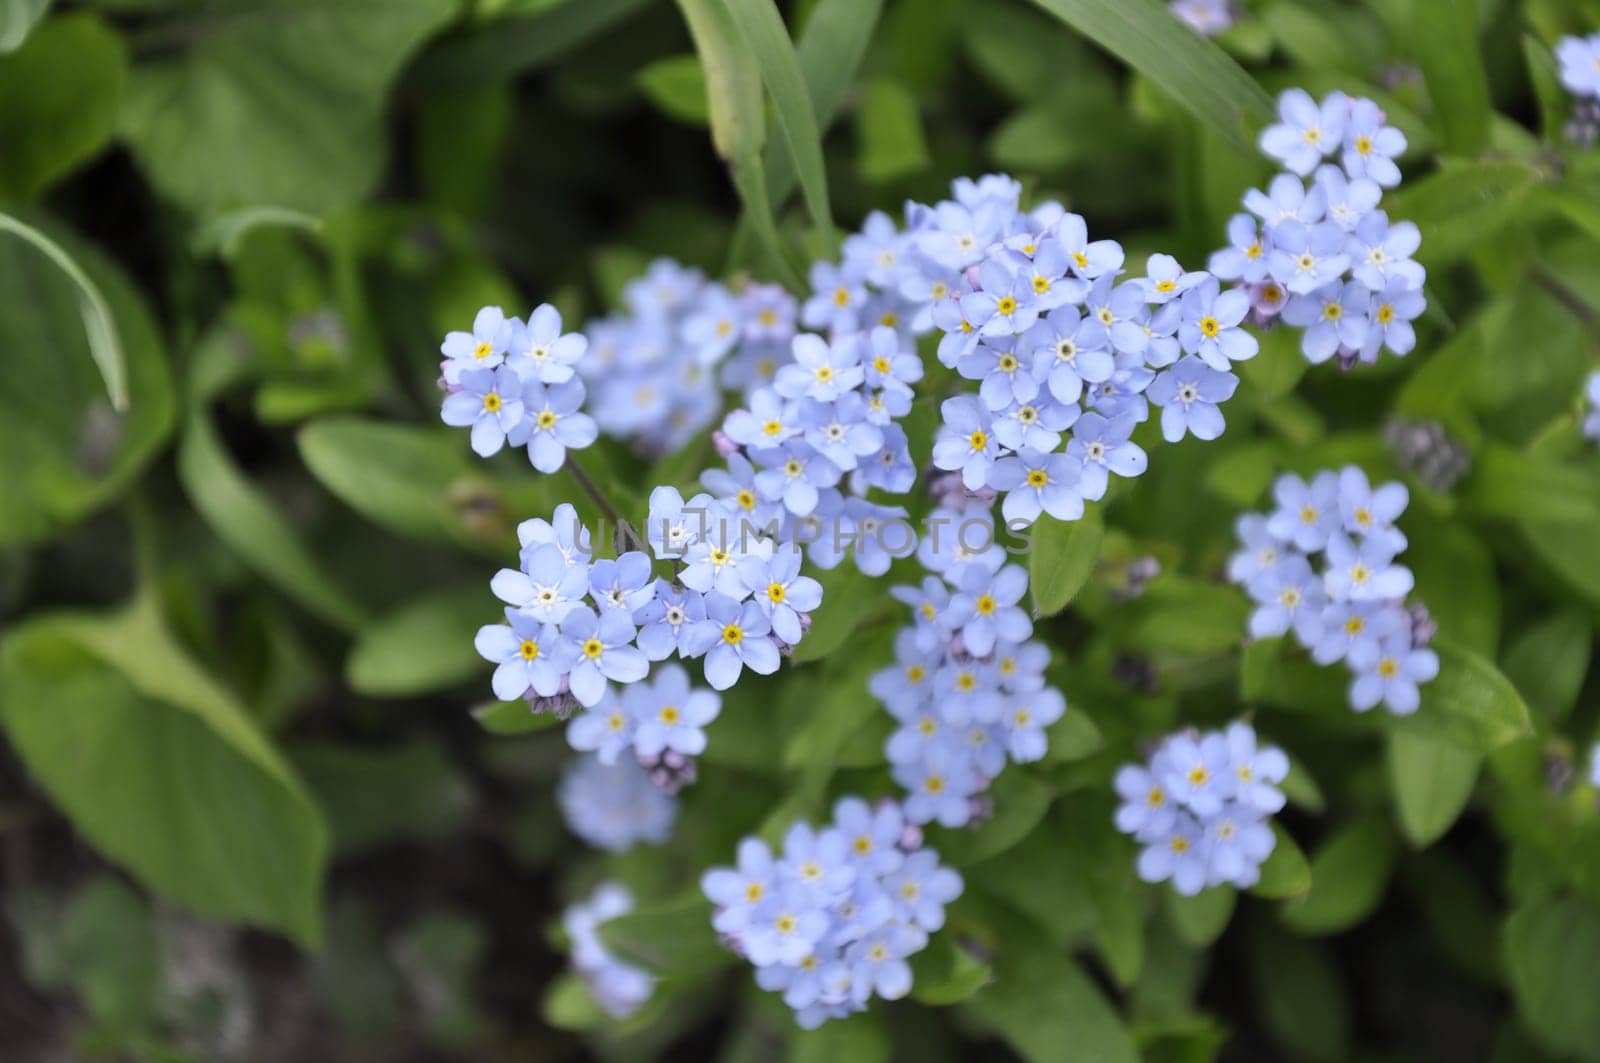 Blue forget-me-not flowers. The first spring flowers in the garden.